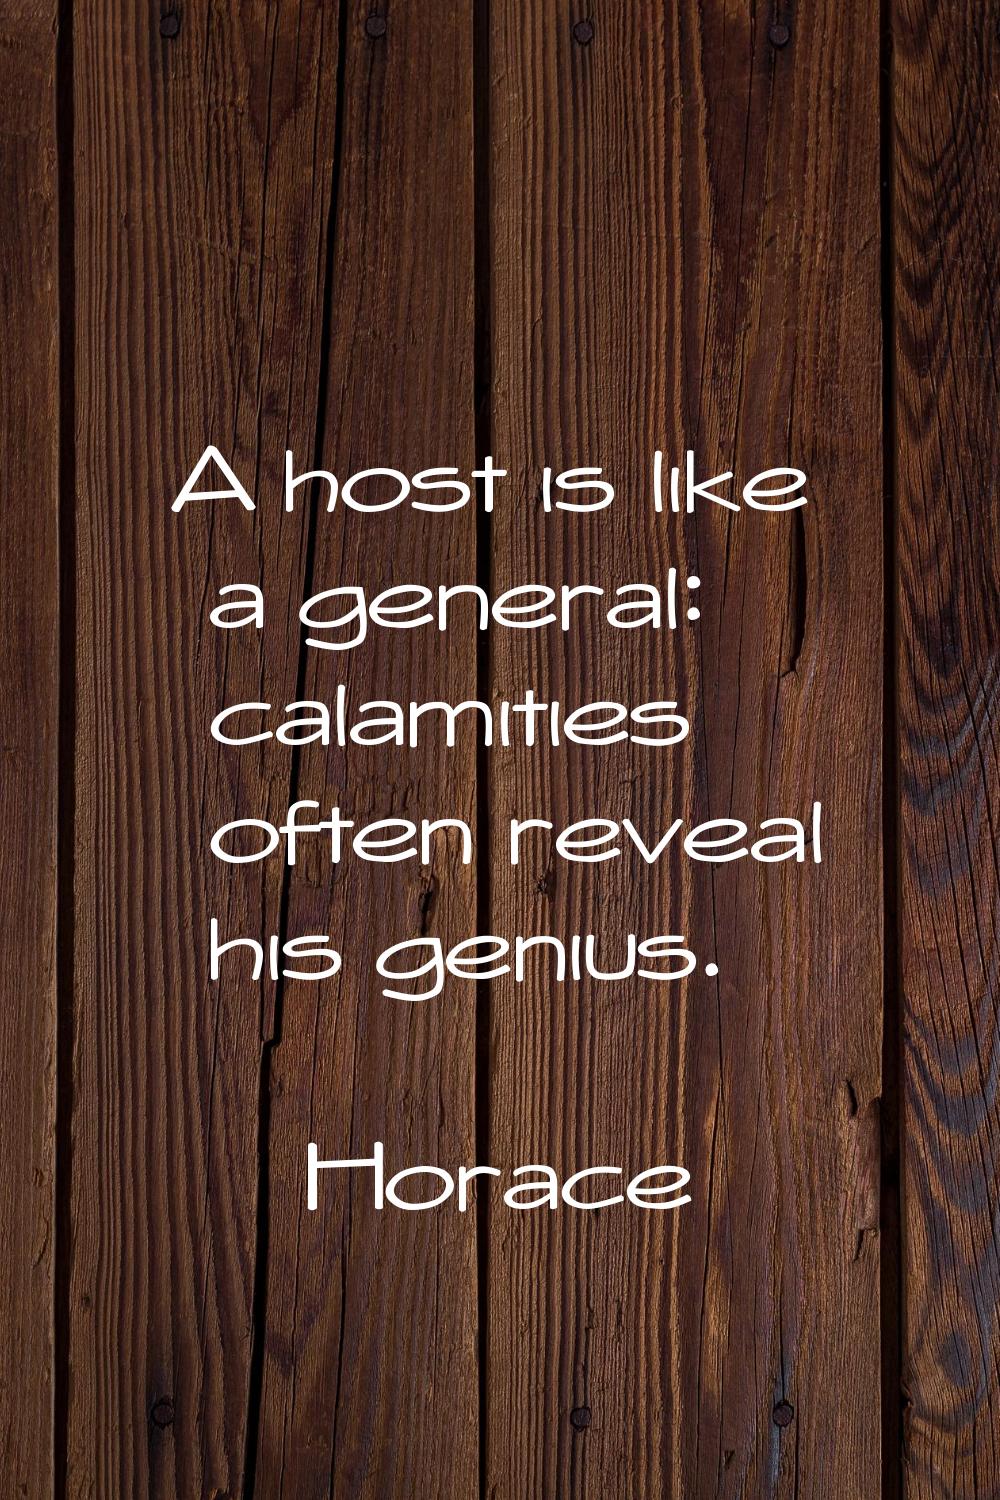 A host is like a general: calamities often reveal his genius.